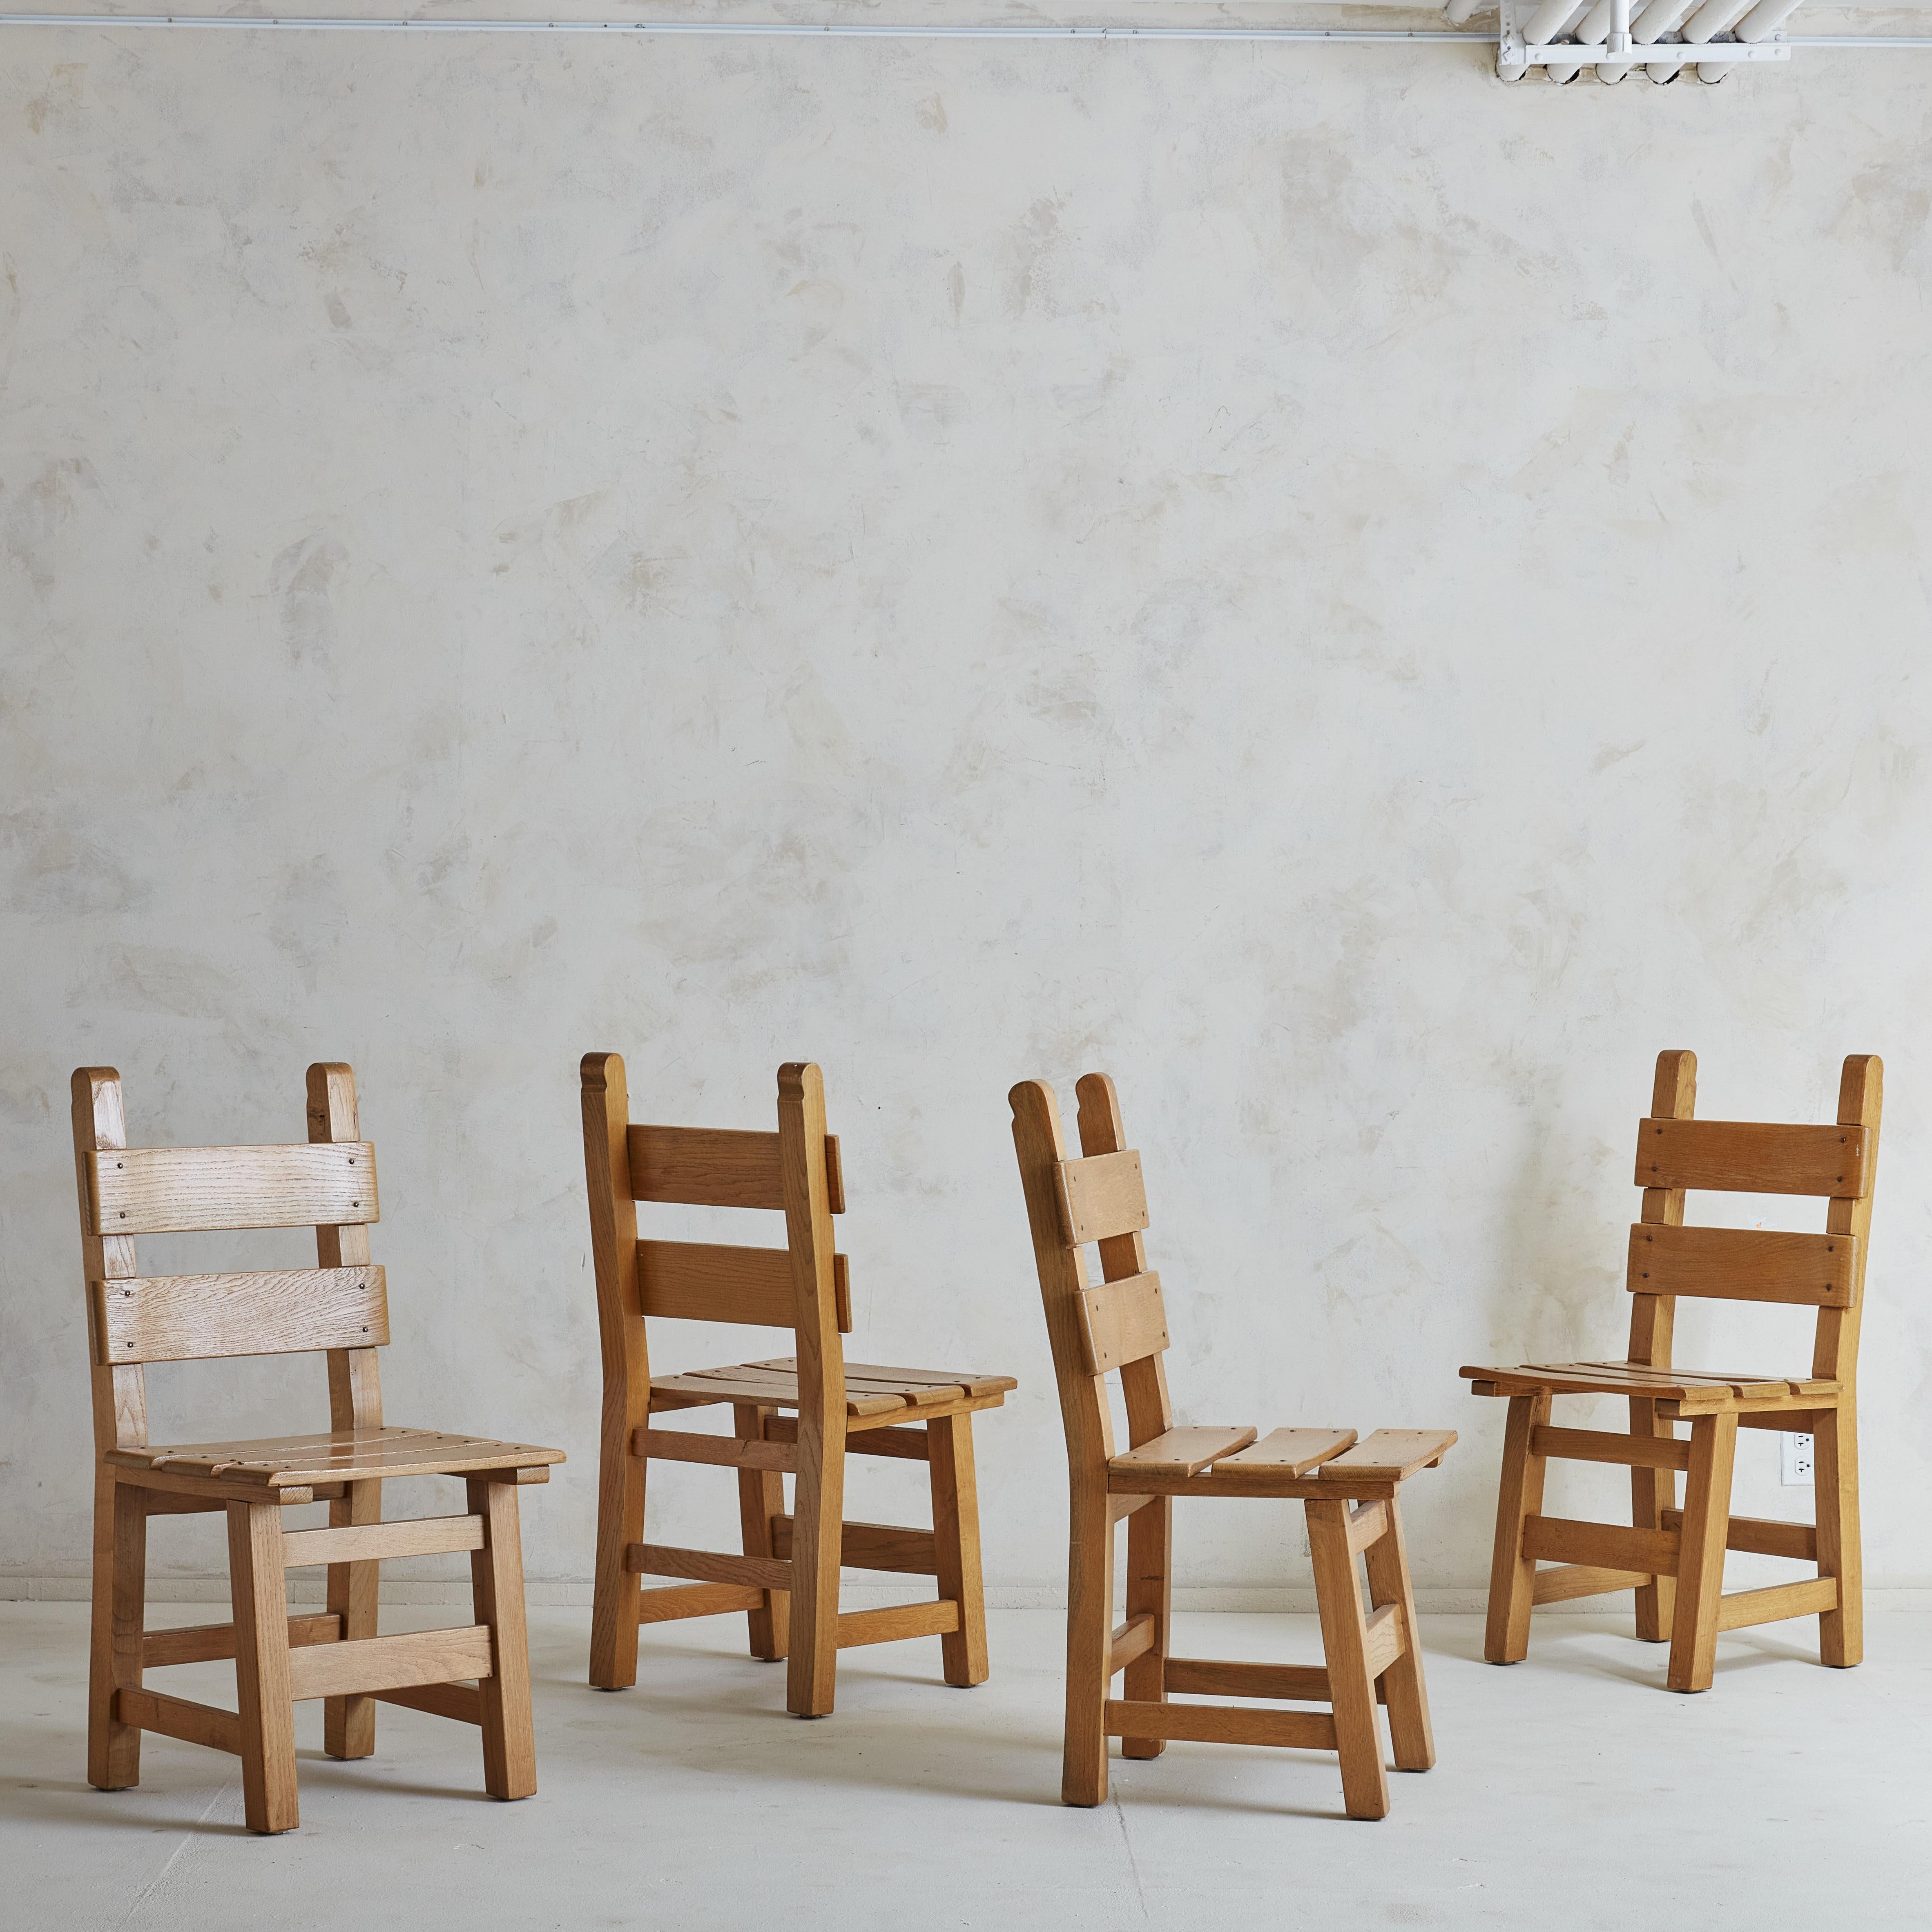 A set of 4 Danish dining chairs constructed of Pine wood. A blend of brutalist inspiration + mountain furniture; we find these to be both ultra functional and charming. The aging on the pine wood brings depth + patina to the set in a way that pair